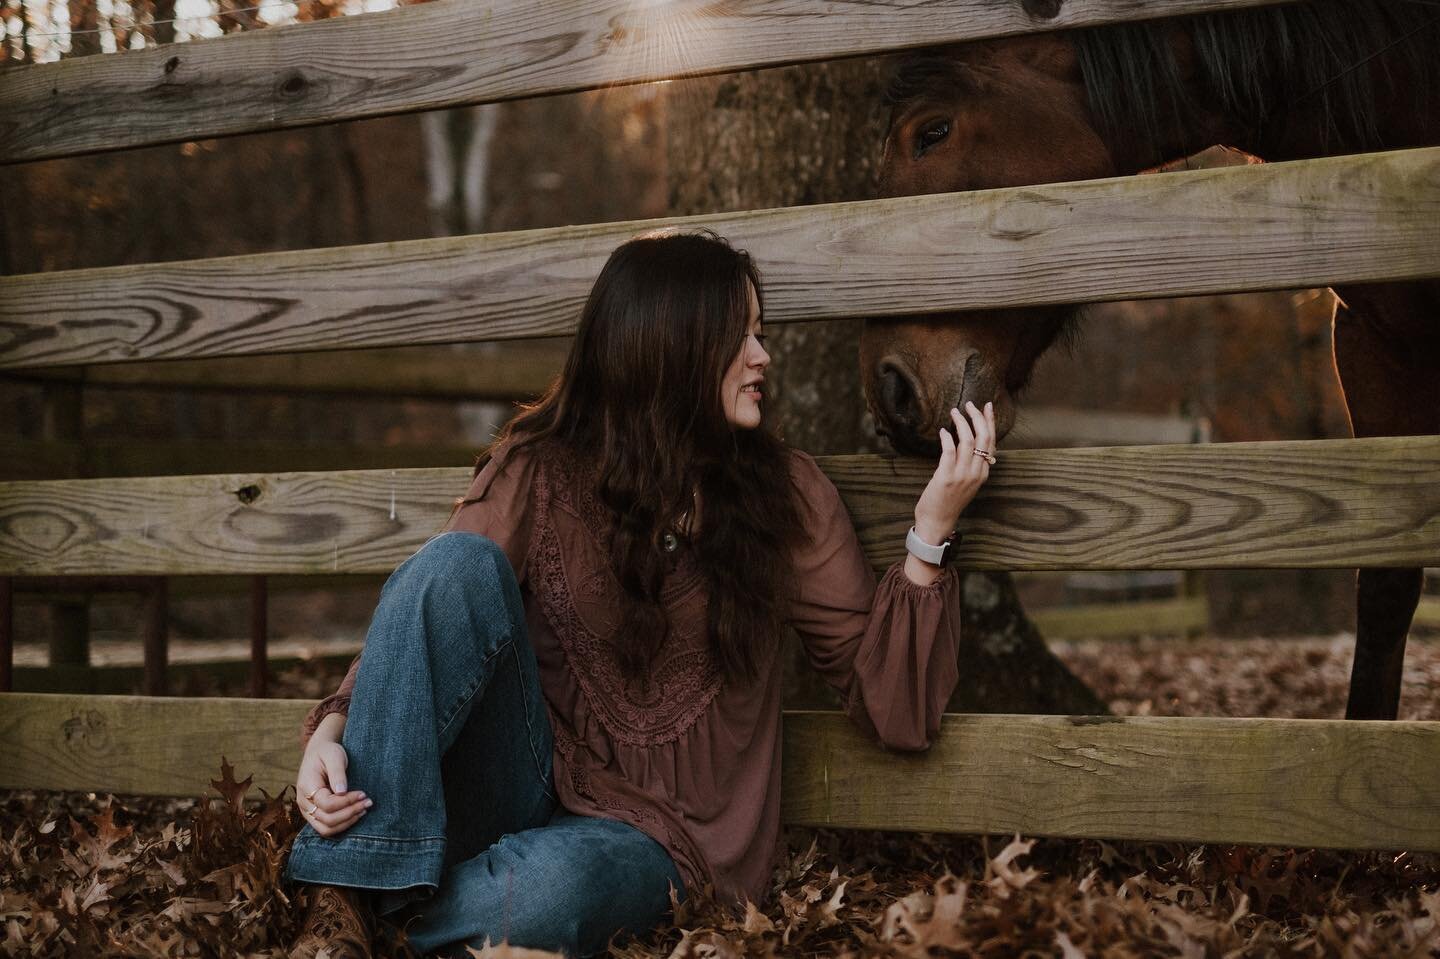 Golden hour, plus fall colors, plus a sweet girl and her horse is a recipe for magic. ✨